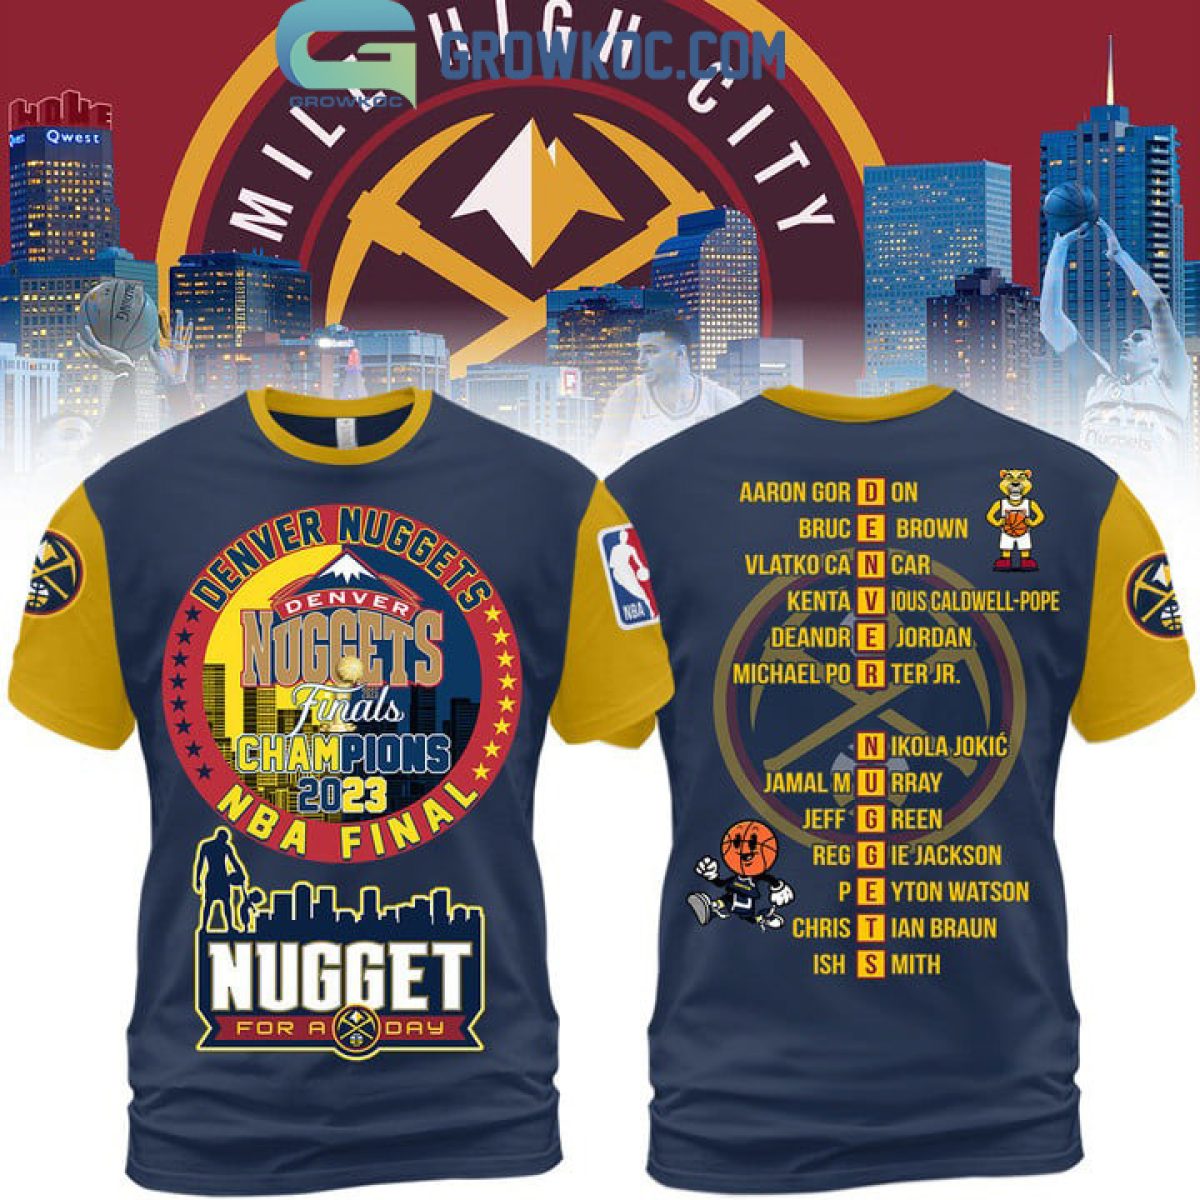 2023 NBA Champions Bring It In Denver Nuggets Personalized Navy Design  Baseball Jersey - Growkoc